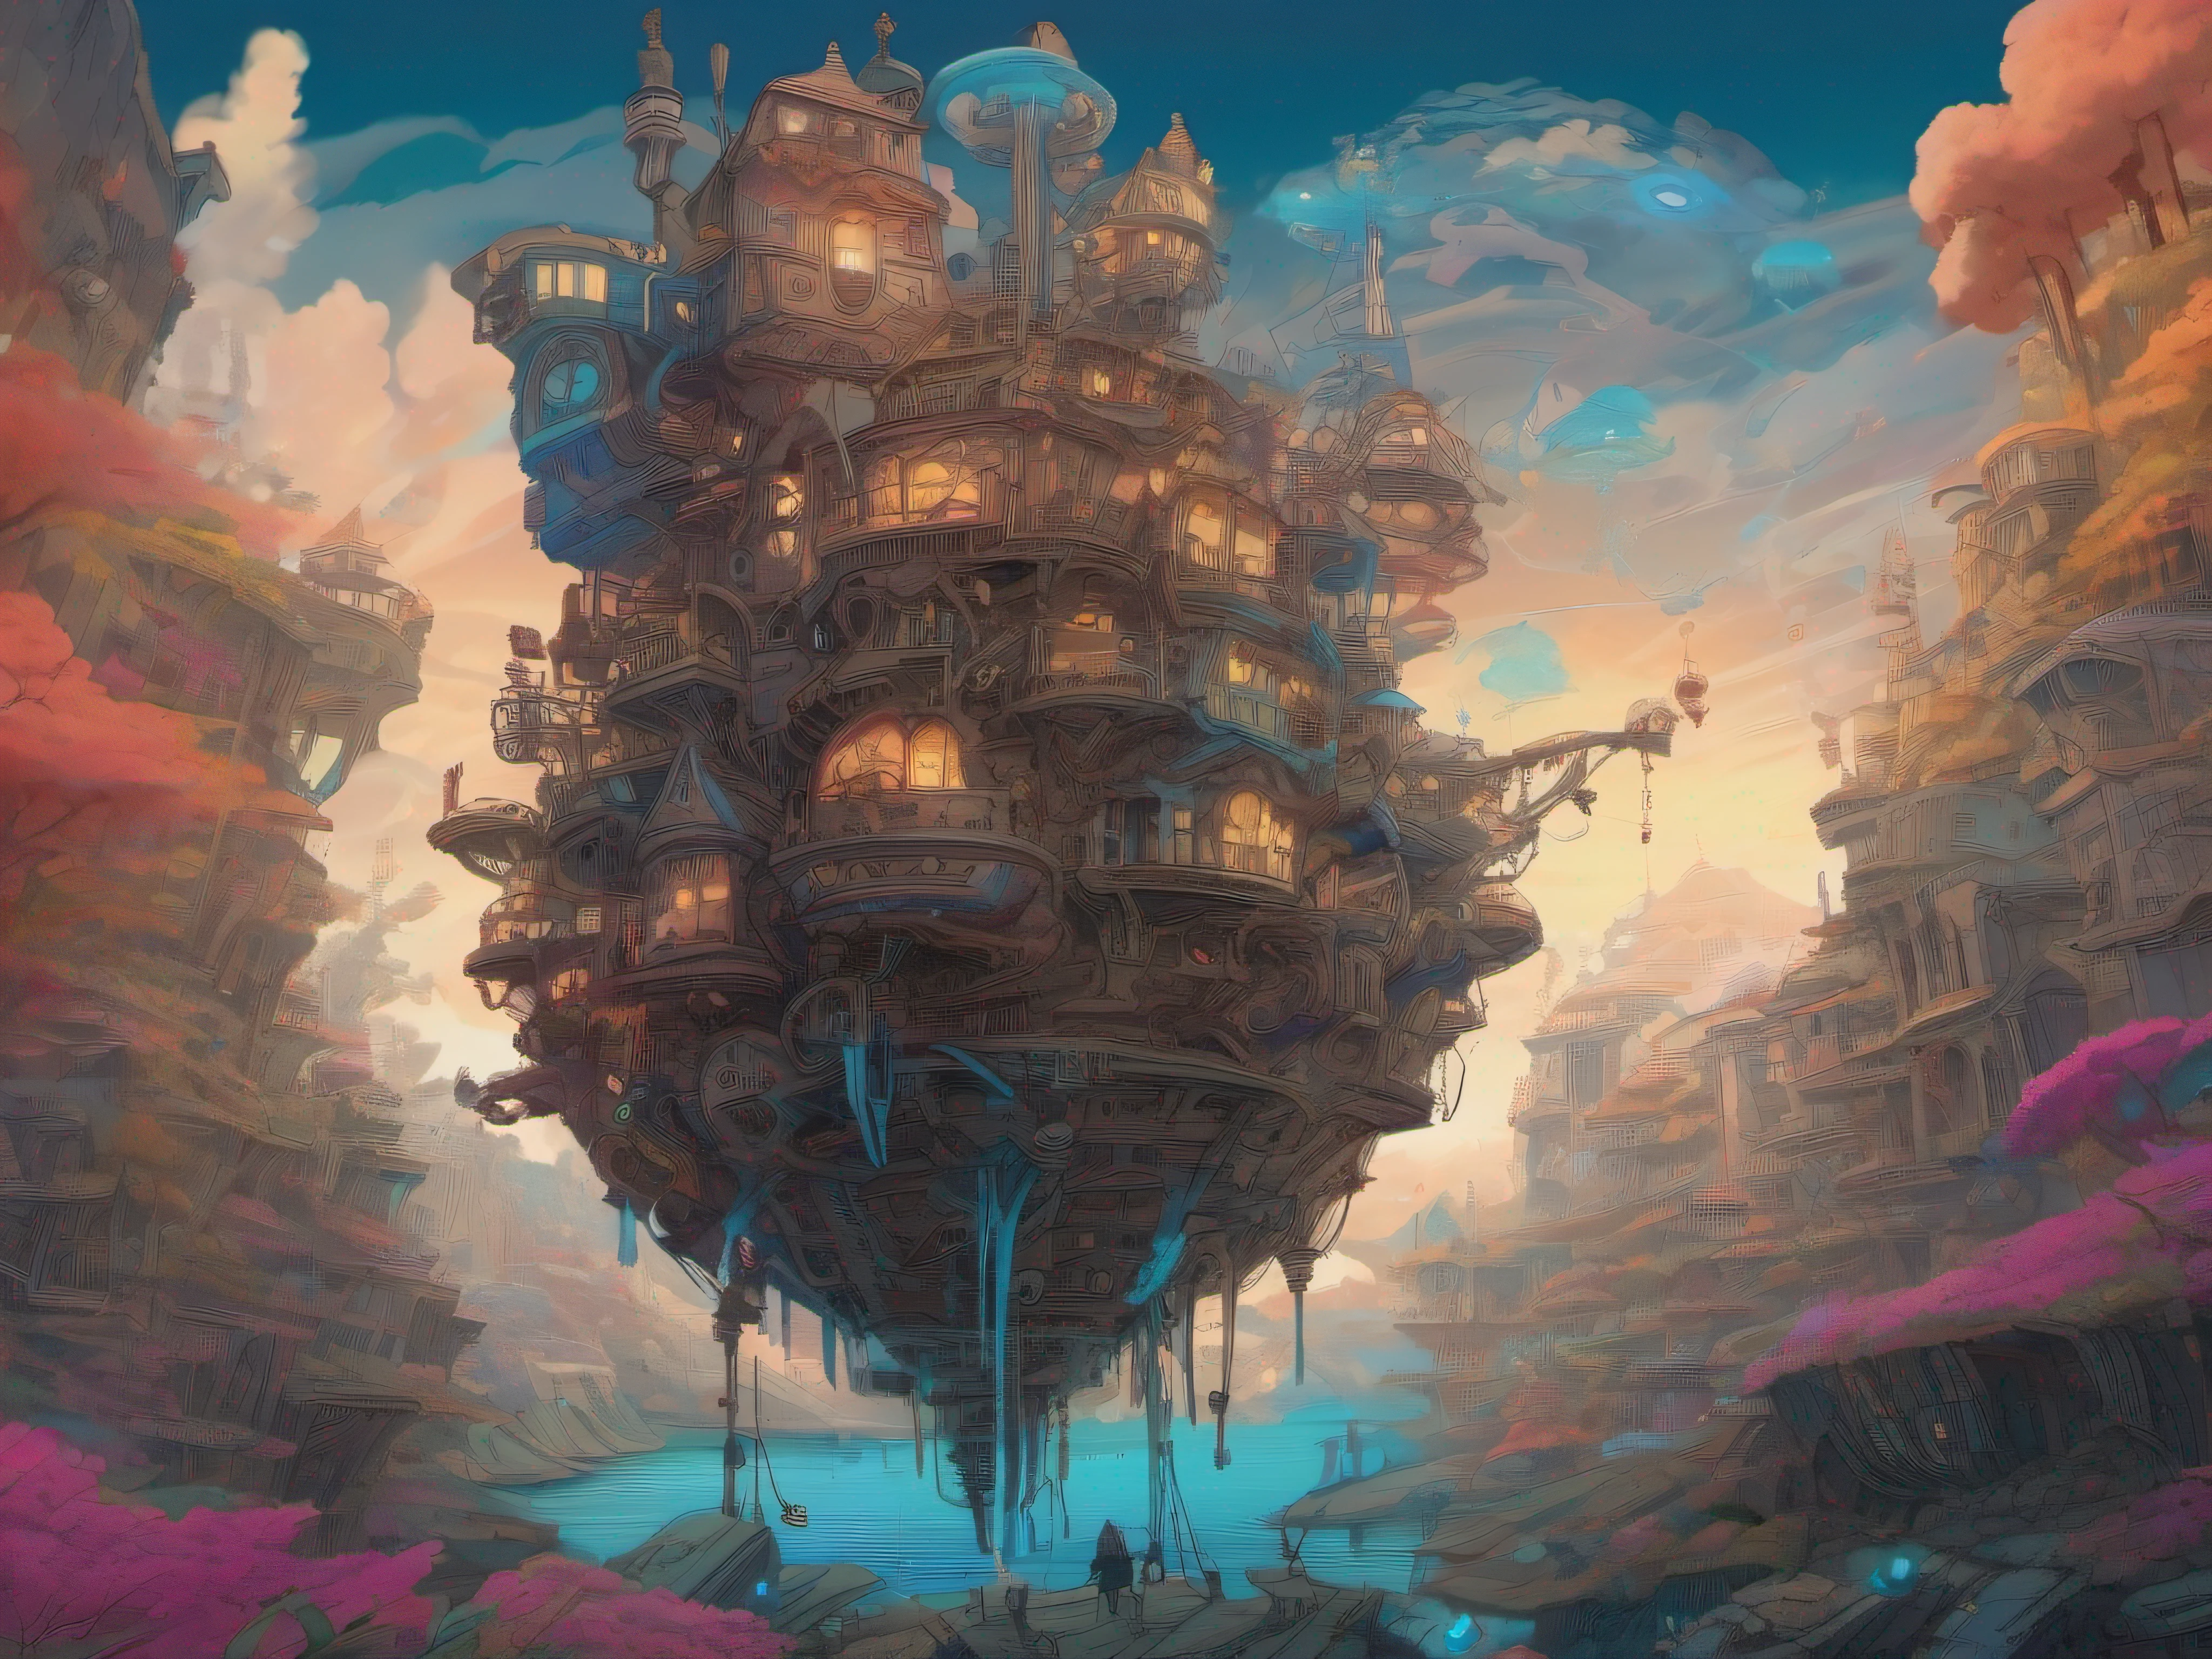 biomechanical moving castle creature, inspired by Miyazaki's "Howl's Moving Castle", with intricate clockwork mechanisms, glowing crystal structures, and floating platforms, surrounded by a vibrant, fantastical landscape.